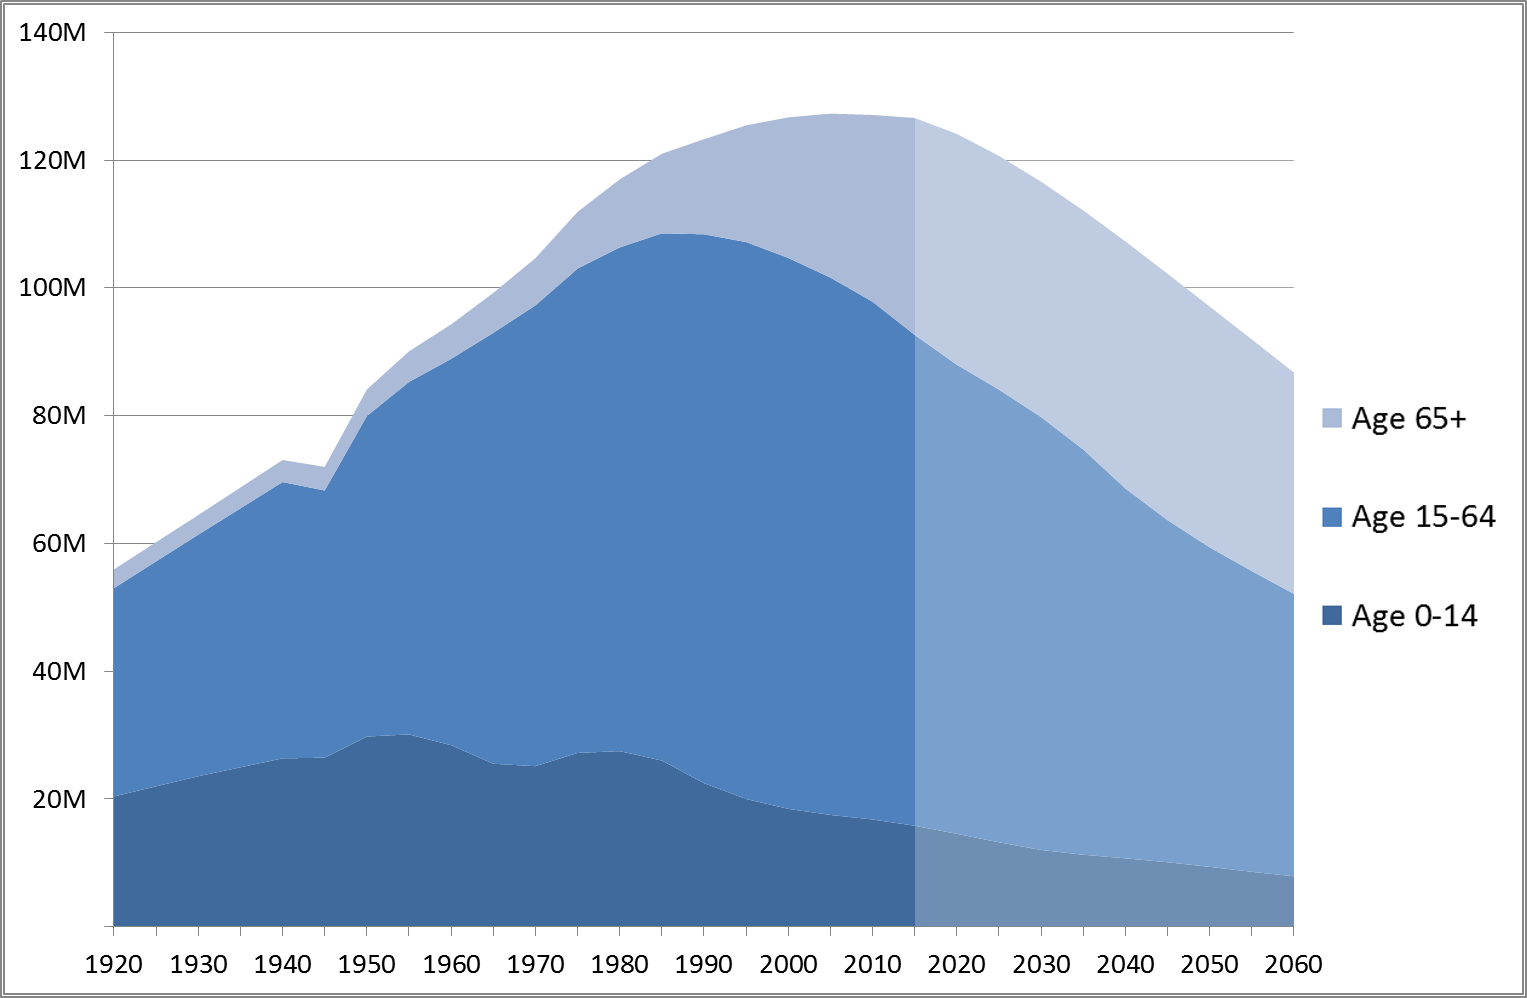 Japan_Population_by_Age_1920-2010_with_Projection_to_2060.png